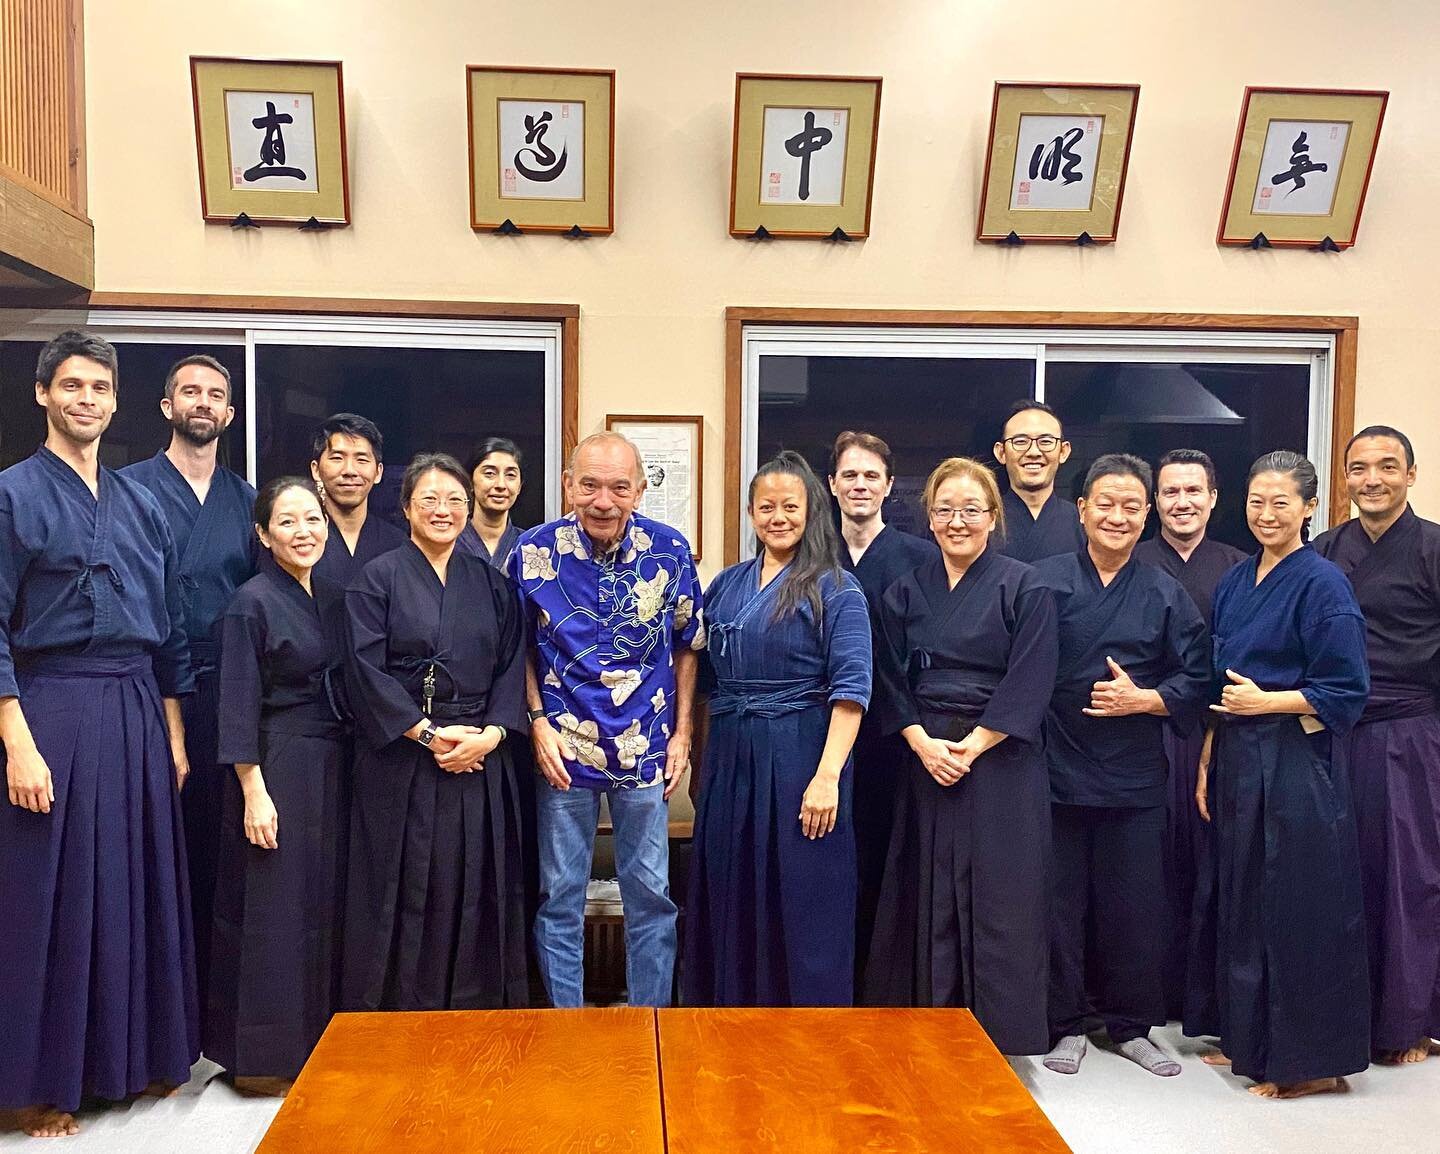 We hosted Governor Waihe&lsquo;e last Thursday as part of our Zen &amp; Politics program. He shared his lessons of leadership including how Tanouye Roshi and the Dojo helped him decide to run for governor in 1986.

This is the second time we have run